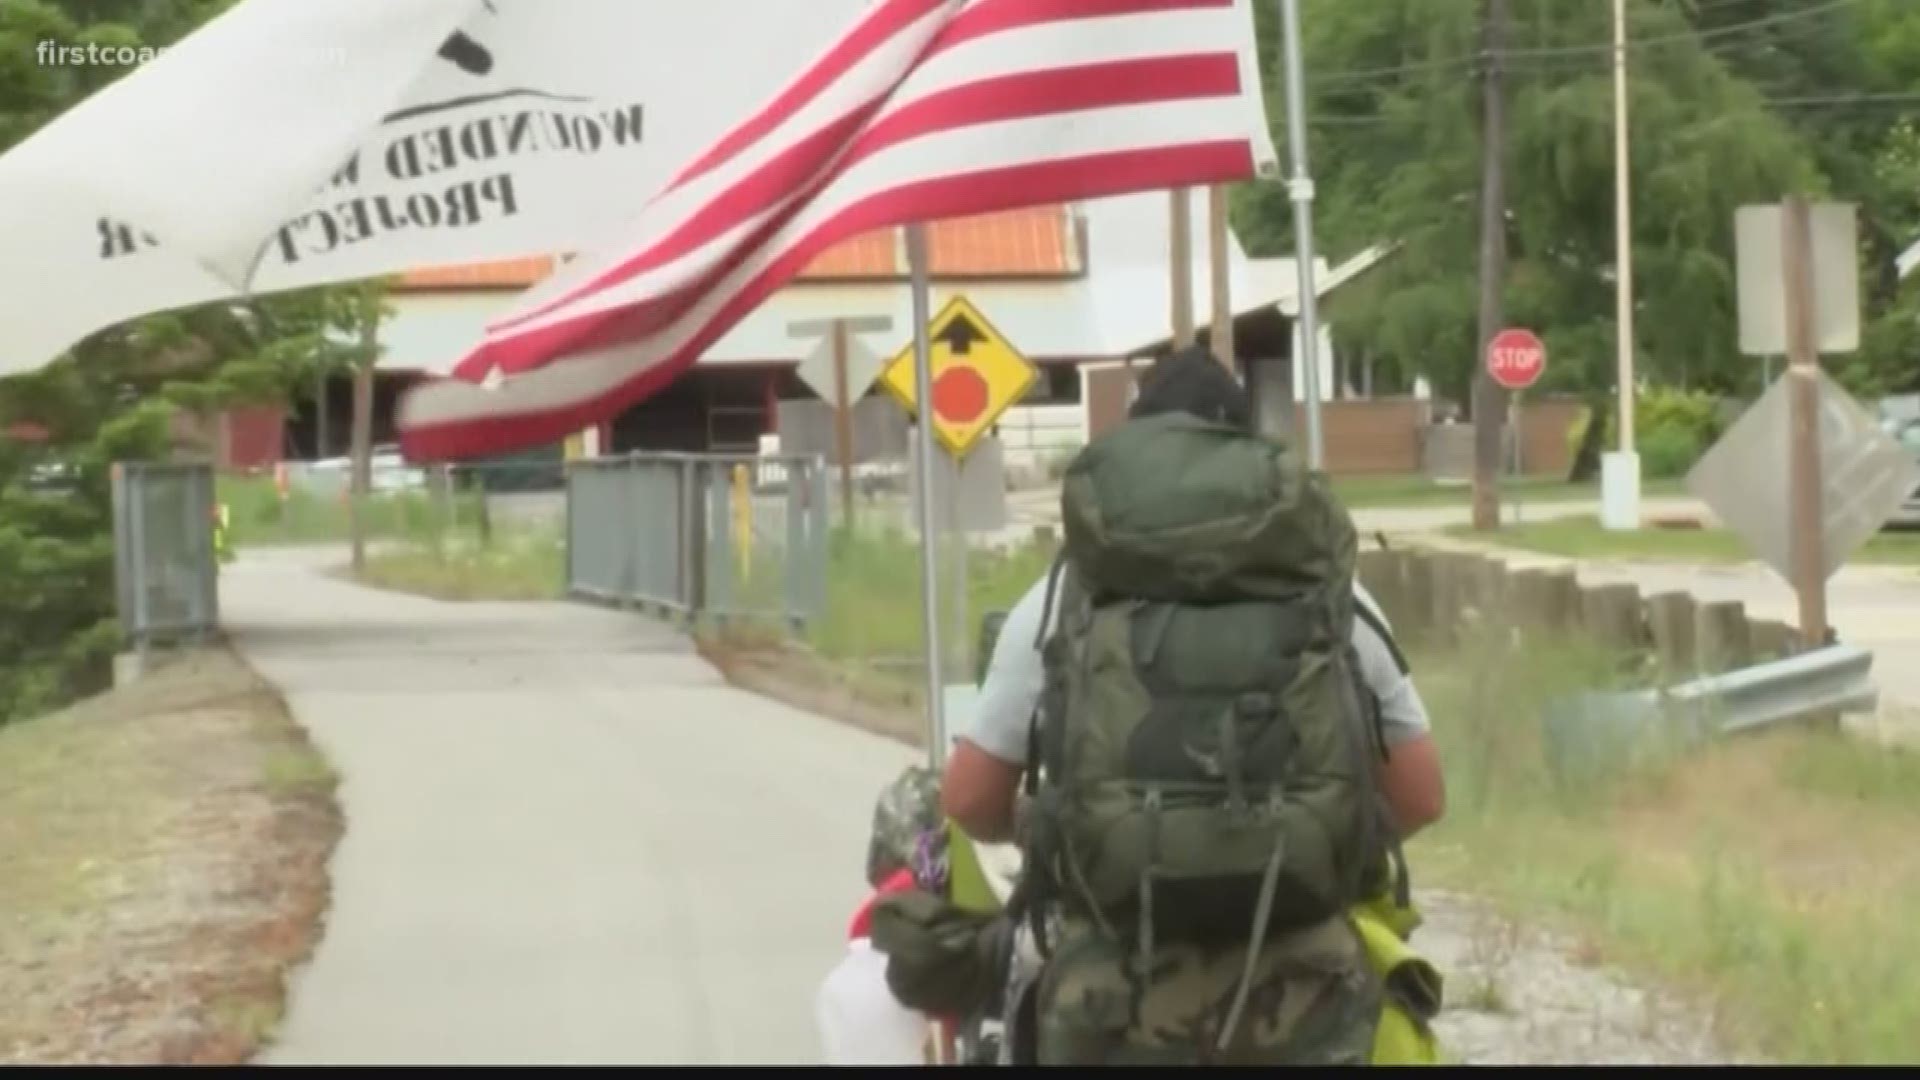 With his service dog by his side, a Keystone Heights veteran has journeyed over 2,600 miles on foot to raise awareness for wounded warriors.